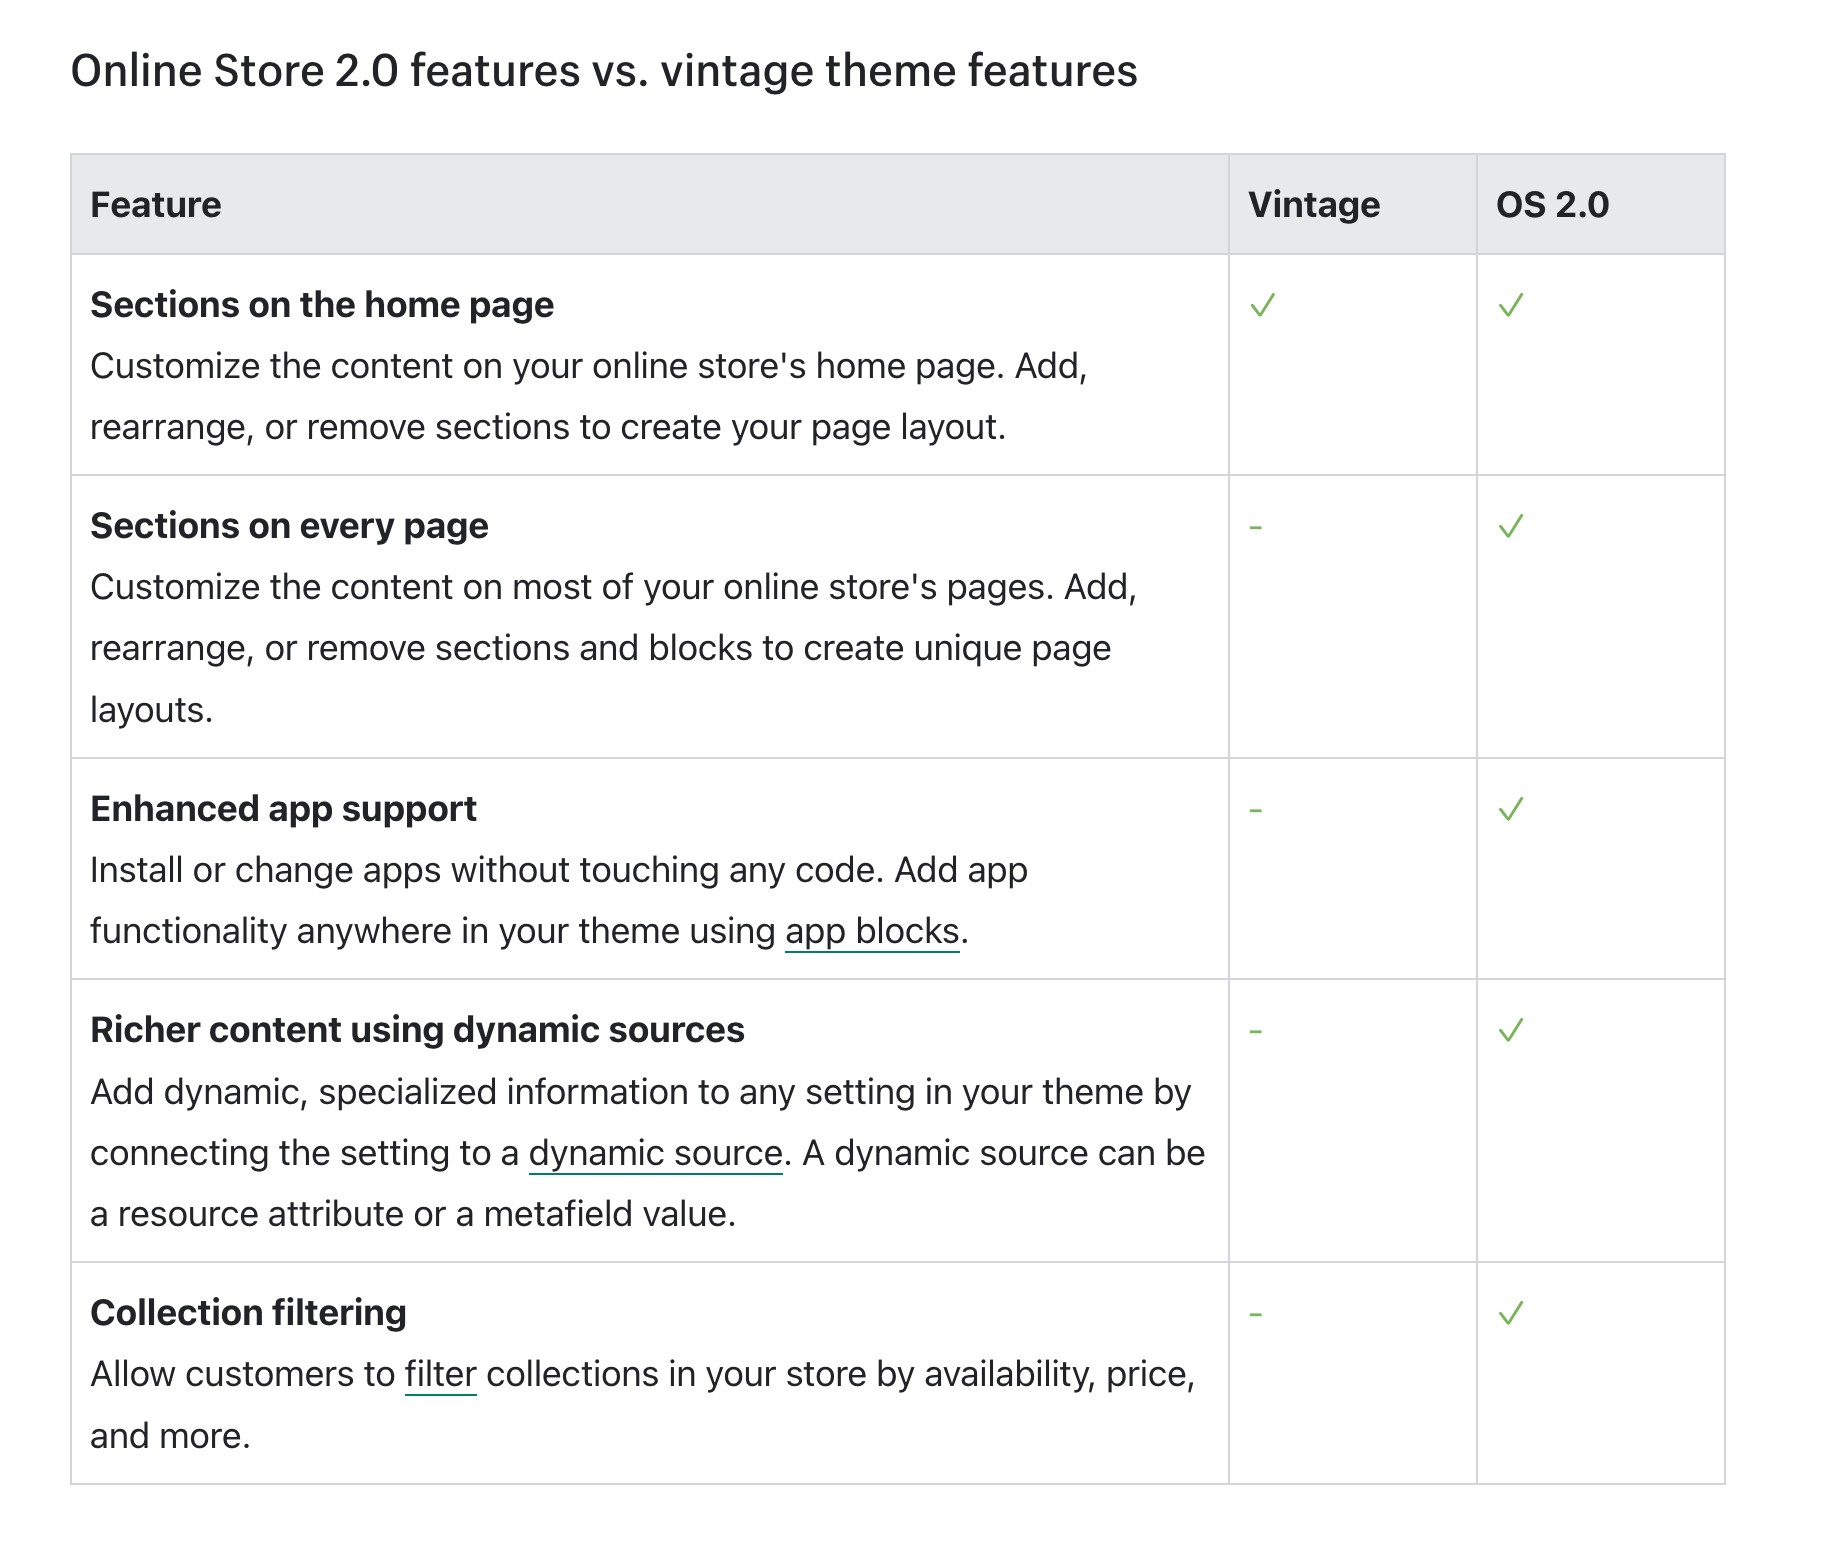 Shopify Online Store 2.0 vs Vintage Themes Chart from Shopify